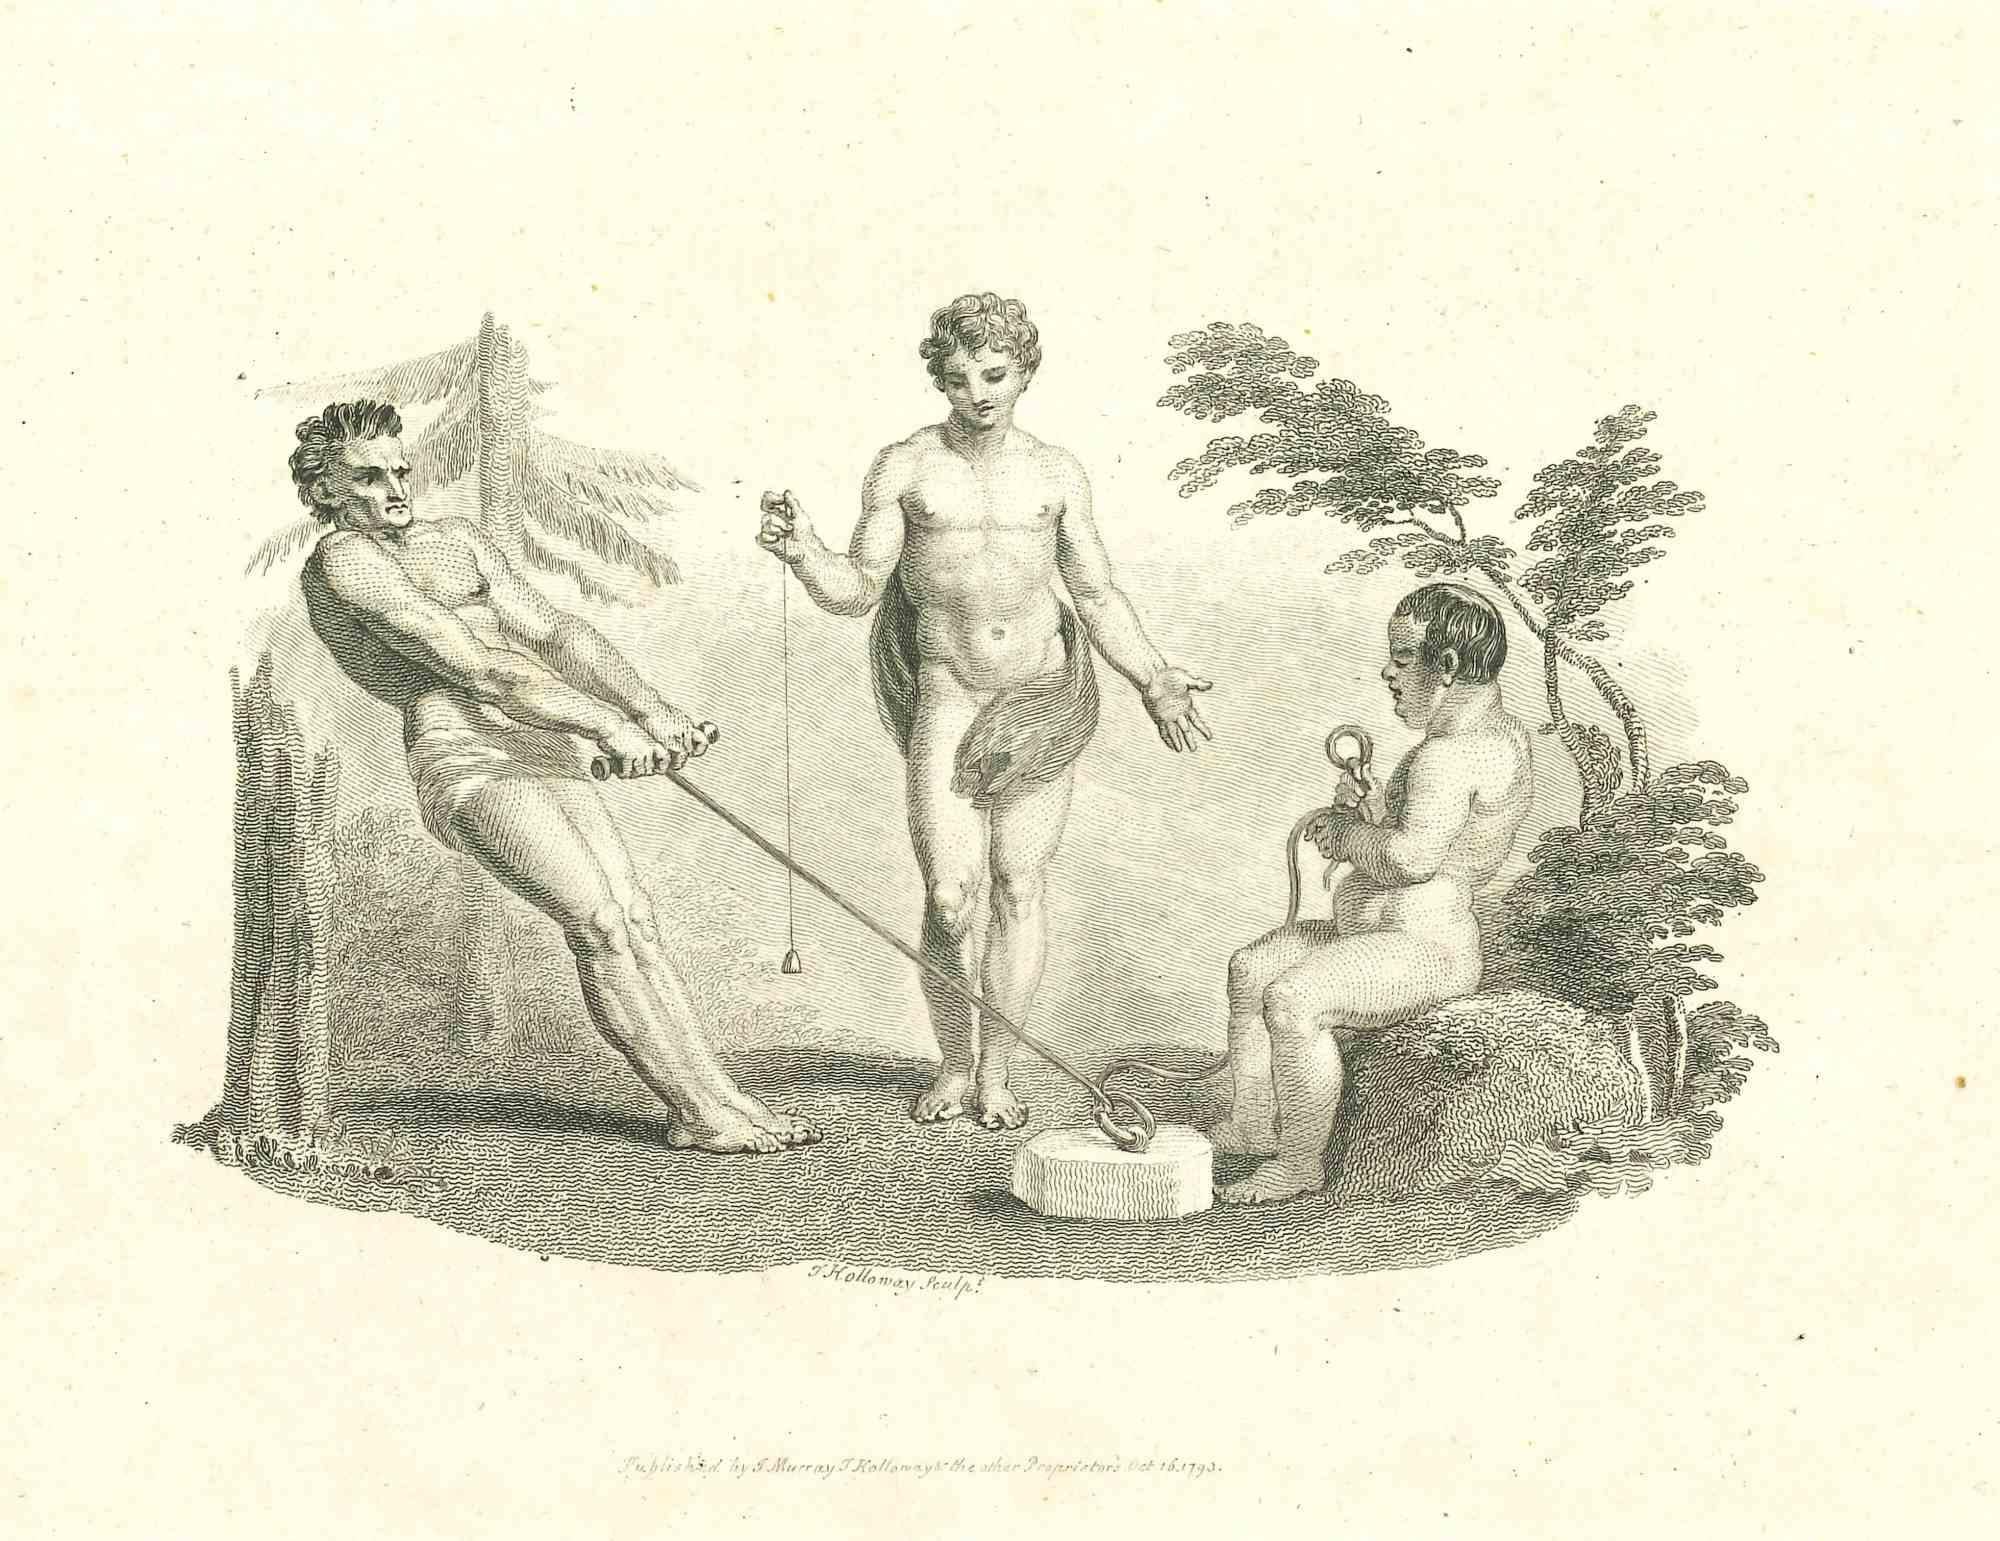 Exercise is an original artwork realized by Thomas Holloway for Johann Caspar Lavater's  "Essays on Physiognomy, Designed to promote the Knowledge and the Love of Mankind", London, Bensley, 1810. 

On the back of this artwork there is a text.

Good